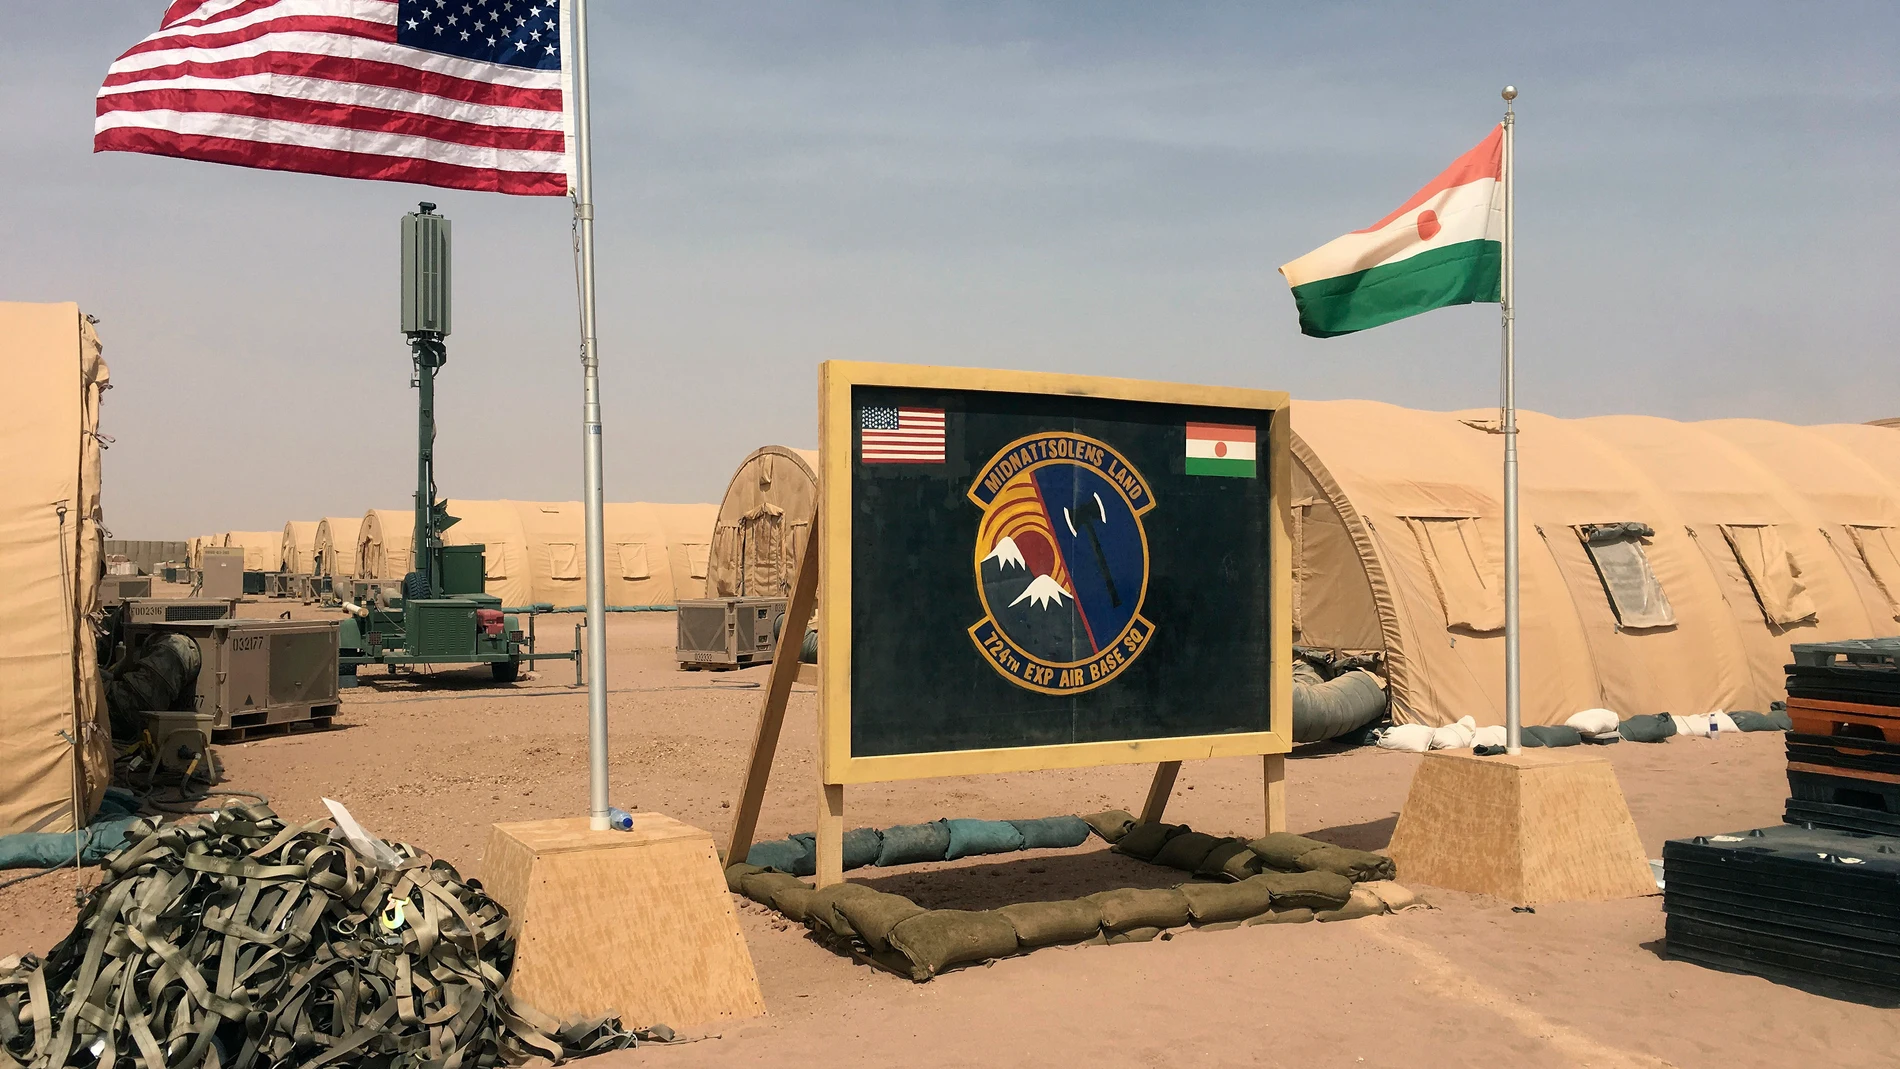 FILE - A U.S. and Niger flag are raised side by side at the base camp for air forces and other personnel supporting the construction of Niger Air Base 201 in Agadez, Niger, April 16, 2018. The United States is attempting to create a new military agreement with Niger that would allow it to remain in the country, weeks after the junta said its presence was no longer justified, two Western officials told The Associated Press Friday April 19, 2024. (AP Photo/Carley Petesch, File)